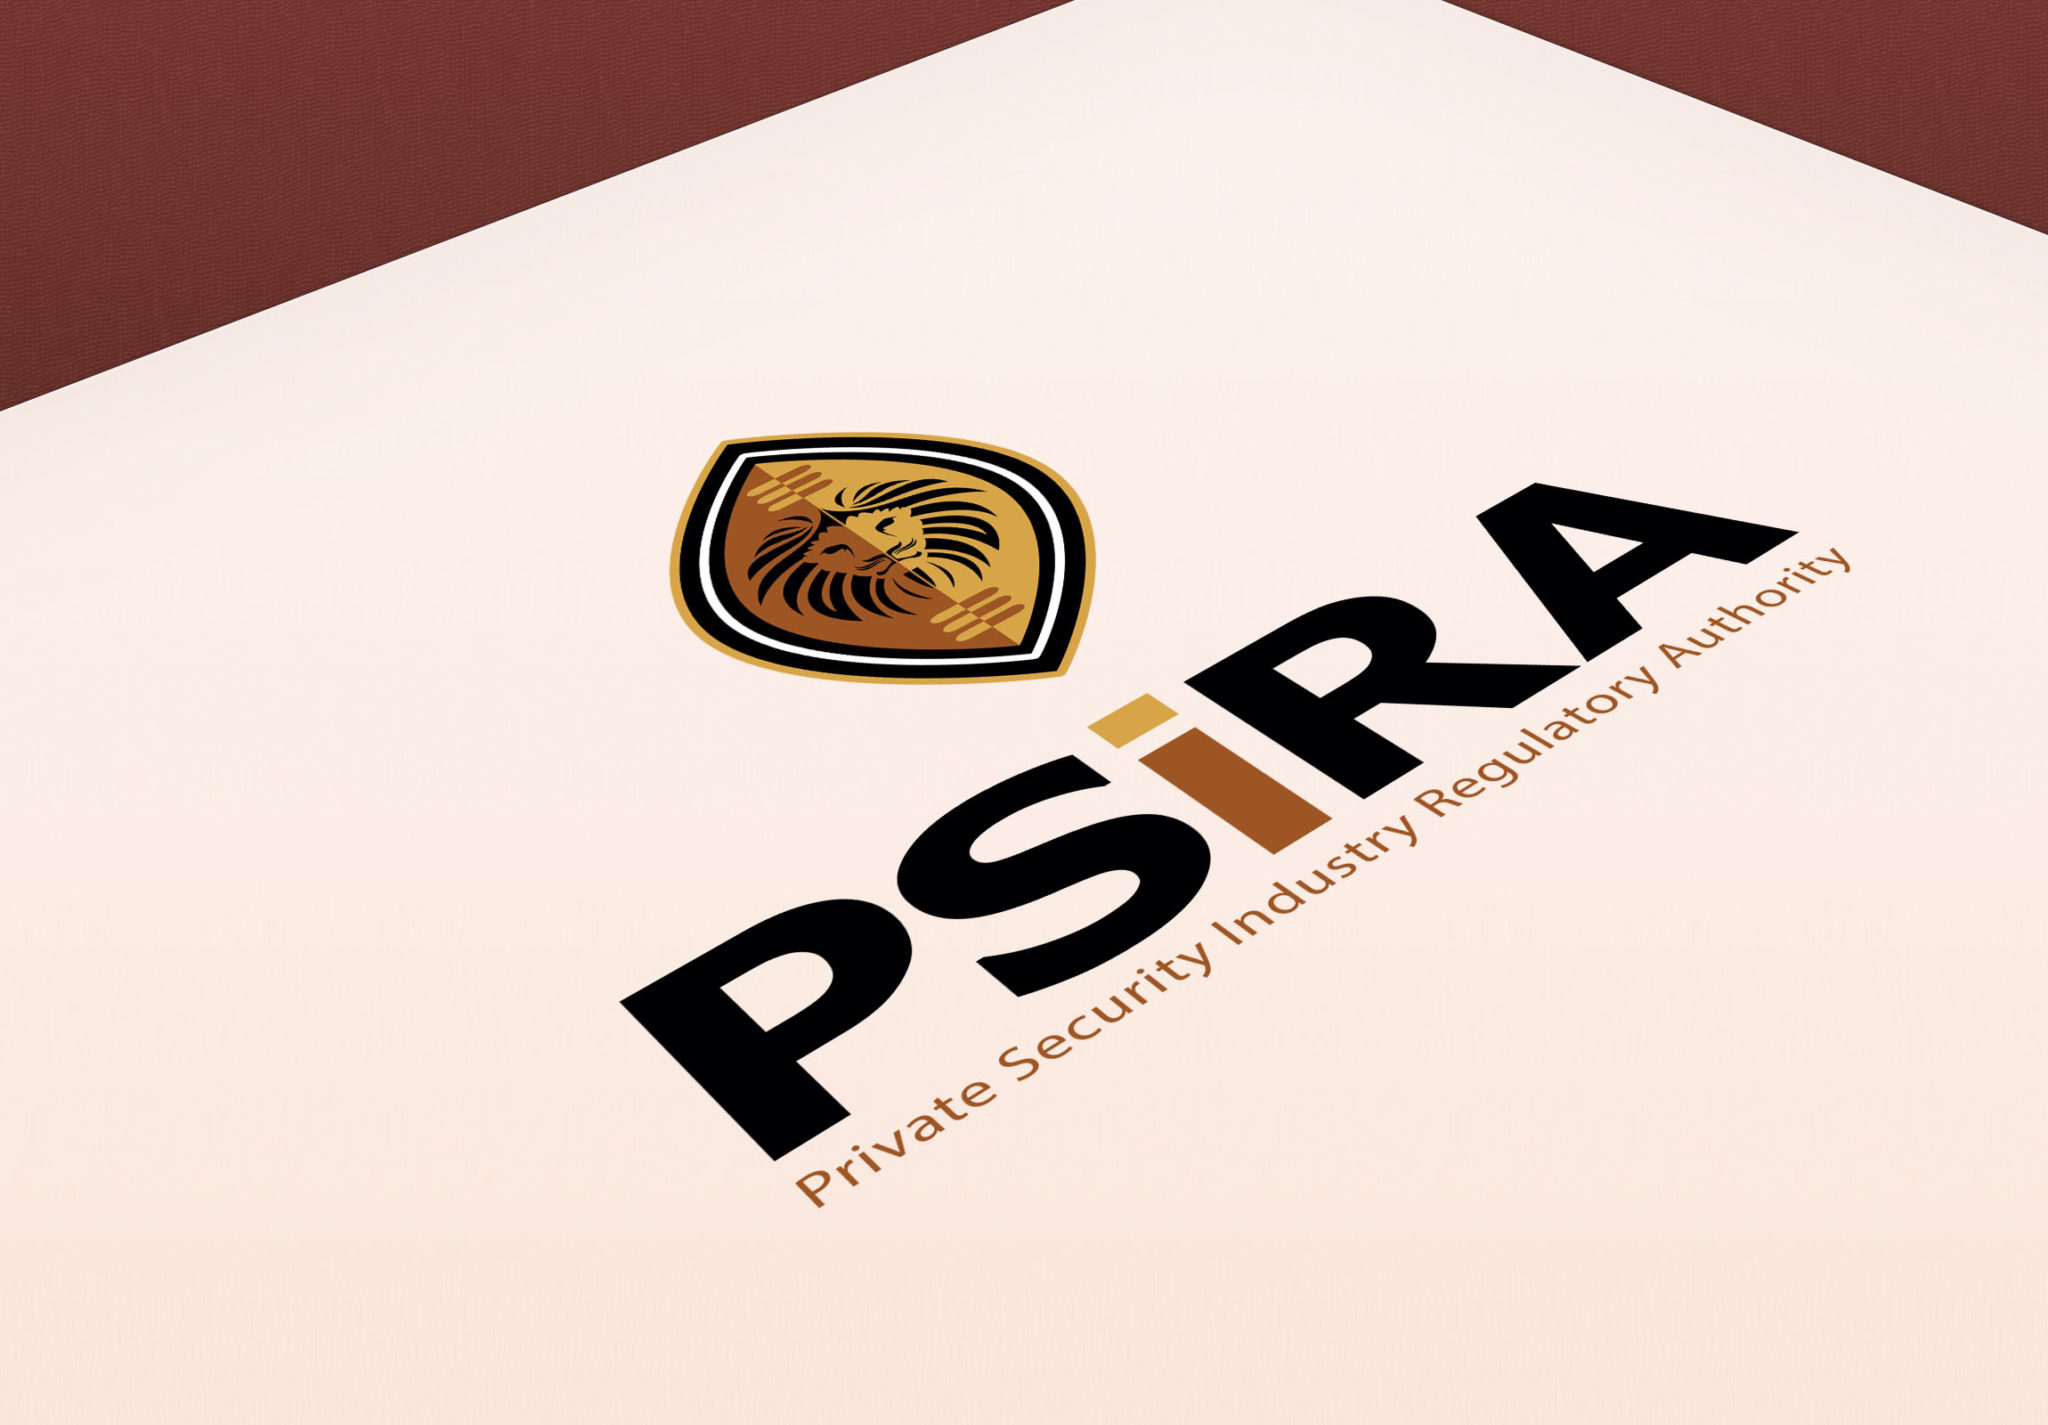 Attention all Security Service Providers: Cut-off date for PSiRA registration